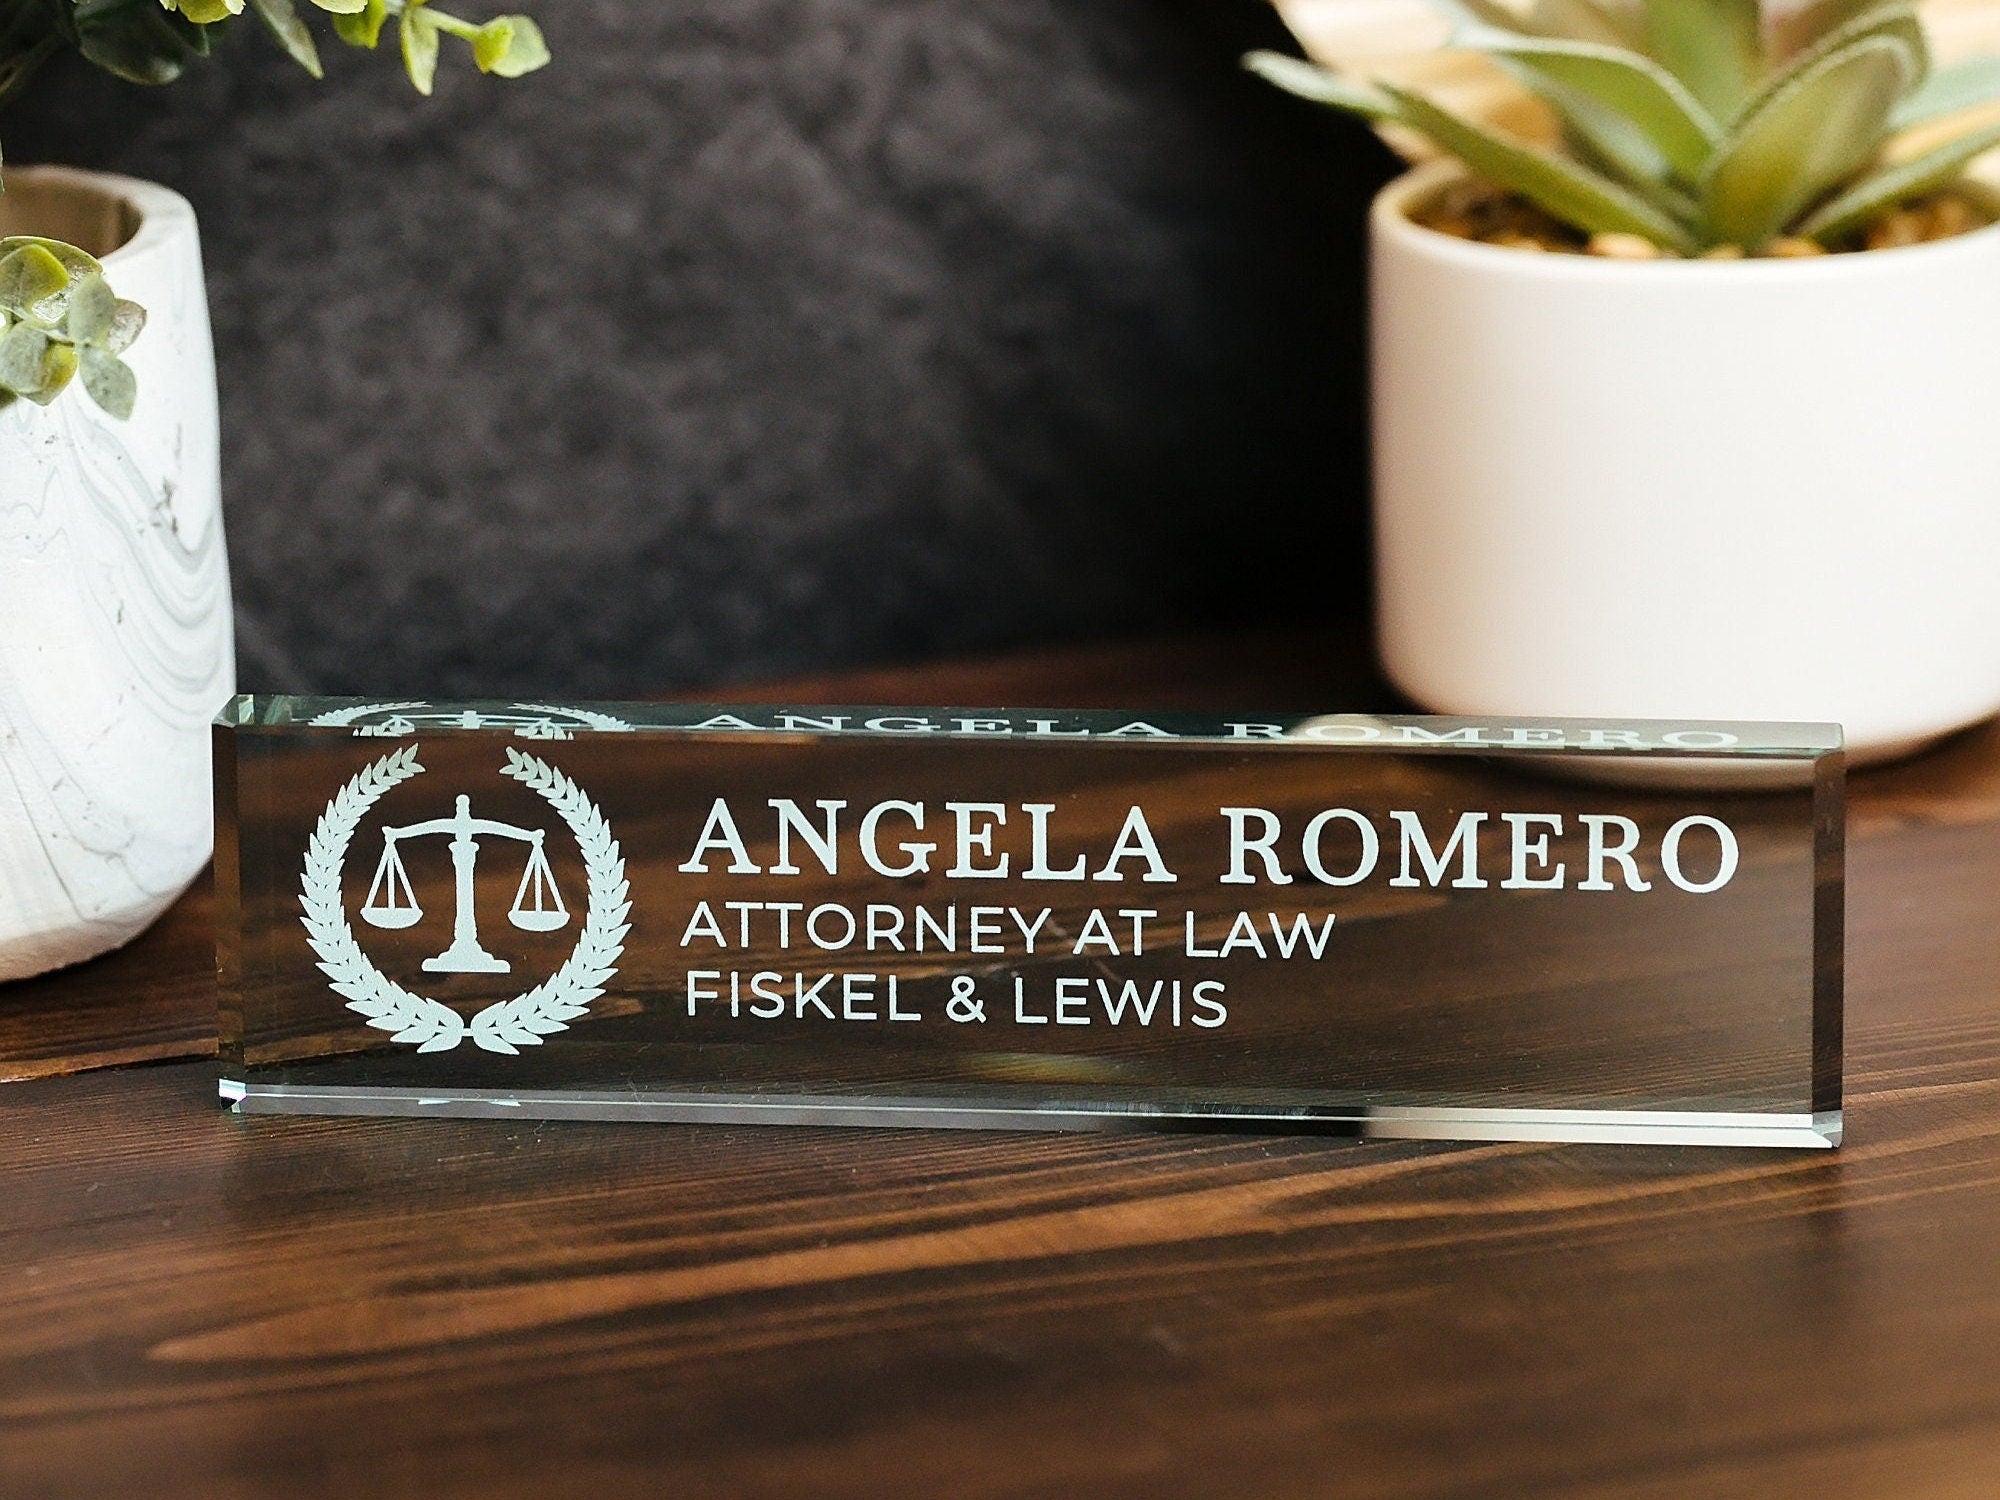 Attorney Glass Office Desk Name Plate, Clear JD Judge Nameplate, Lawyer Appreciation Gift, Juris Doctor Law School Graduation